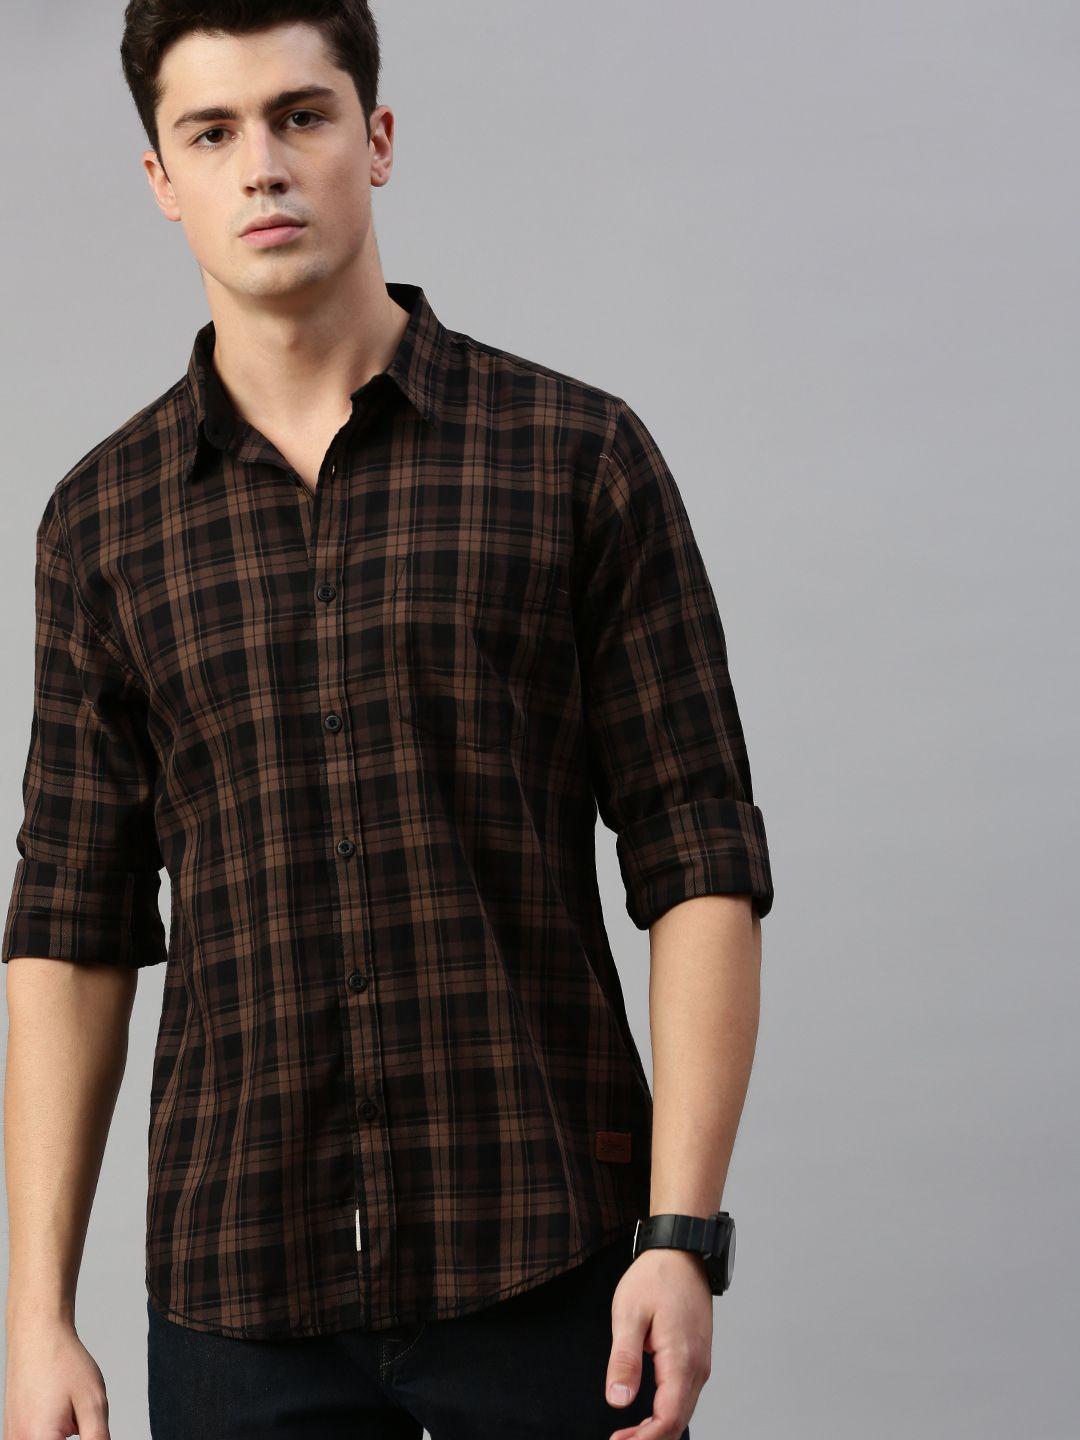 roadster men black & brown checked sustainable casual shirt